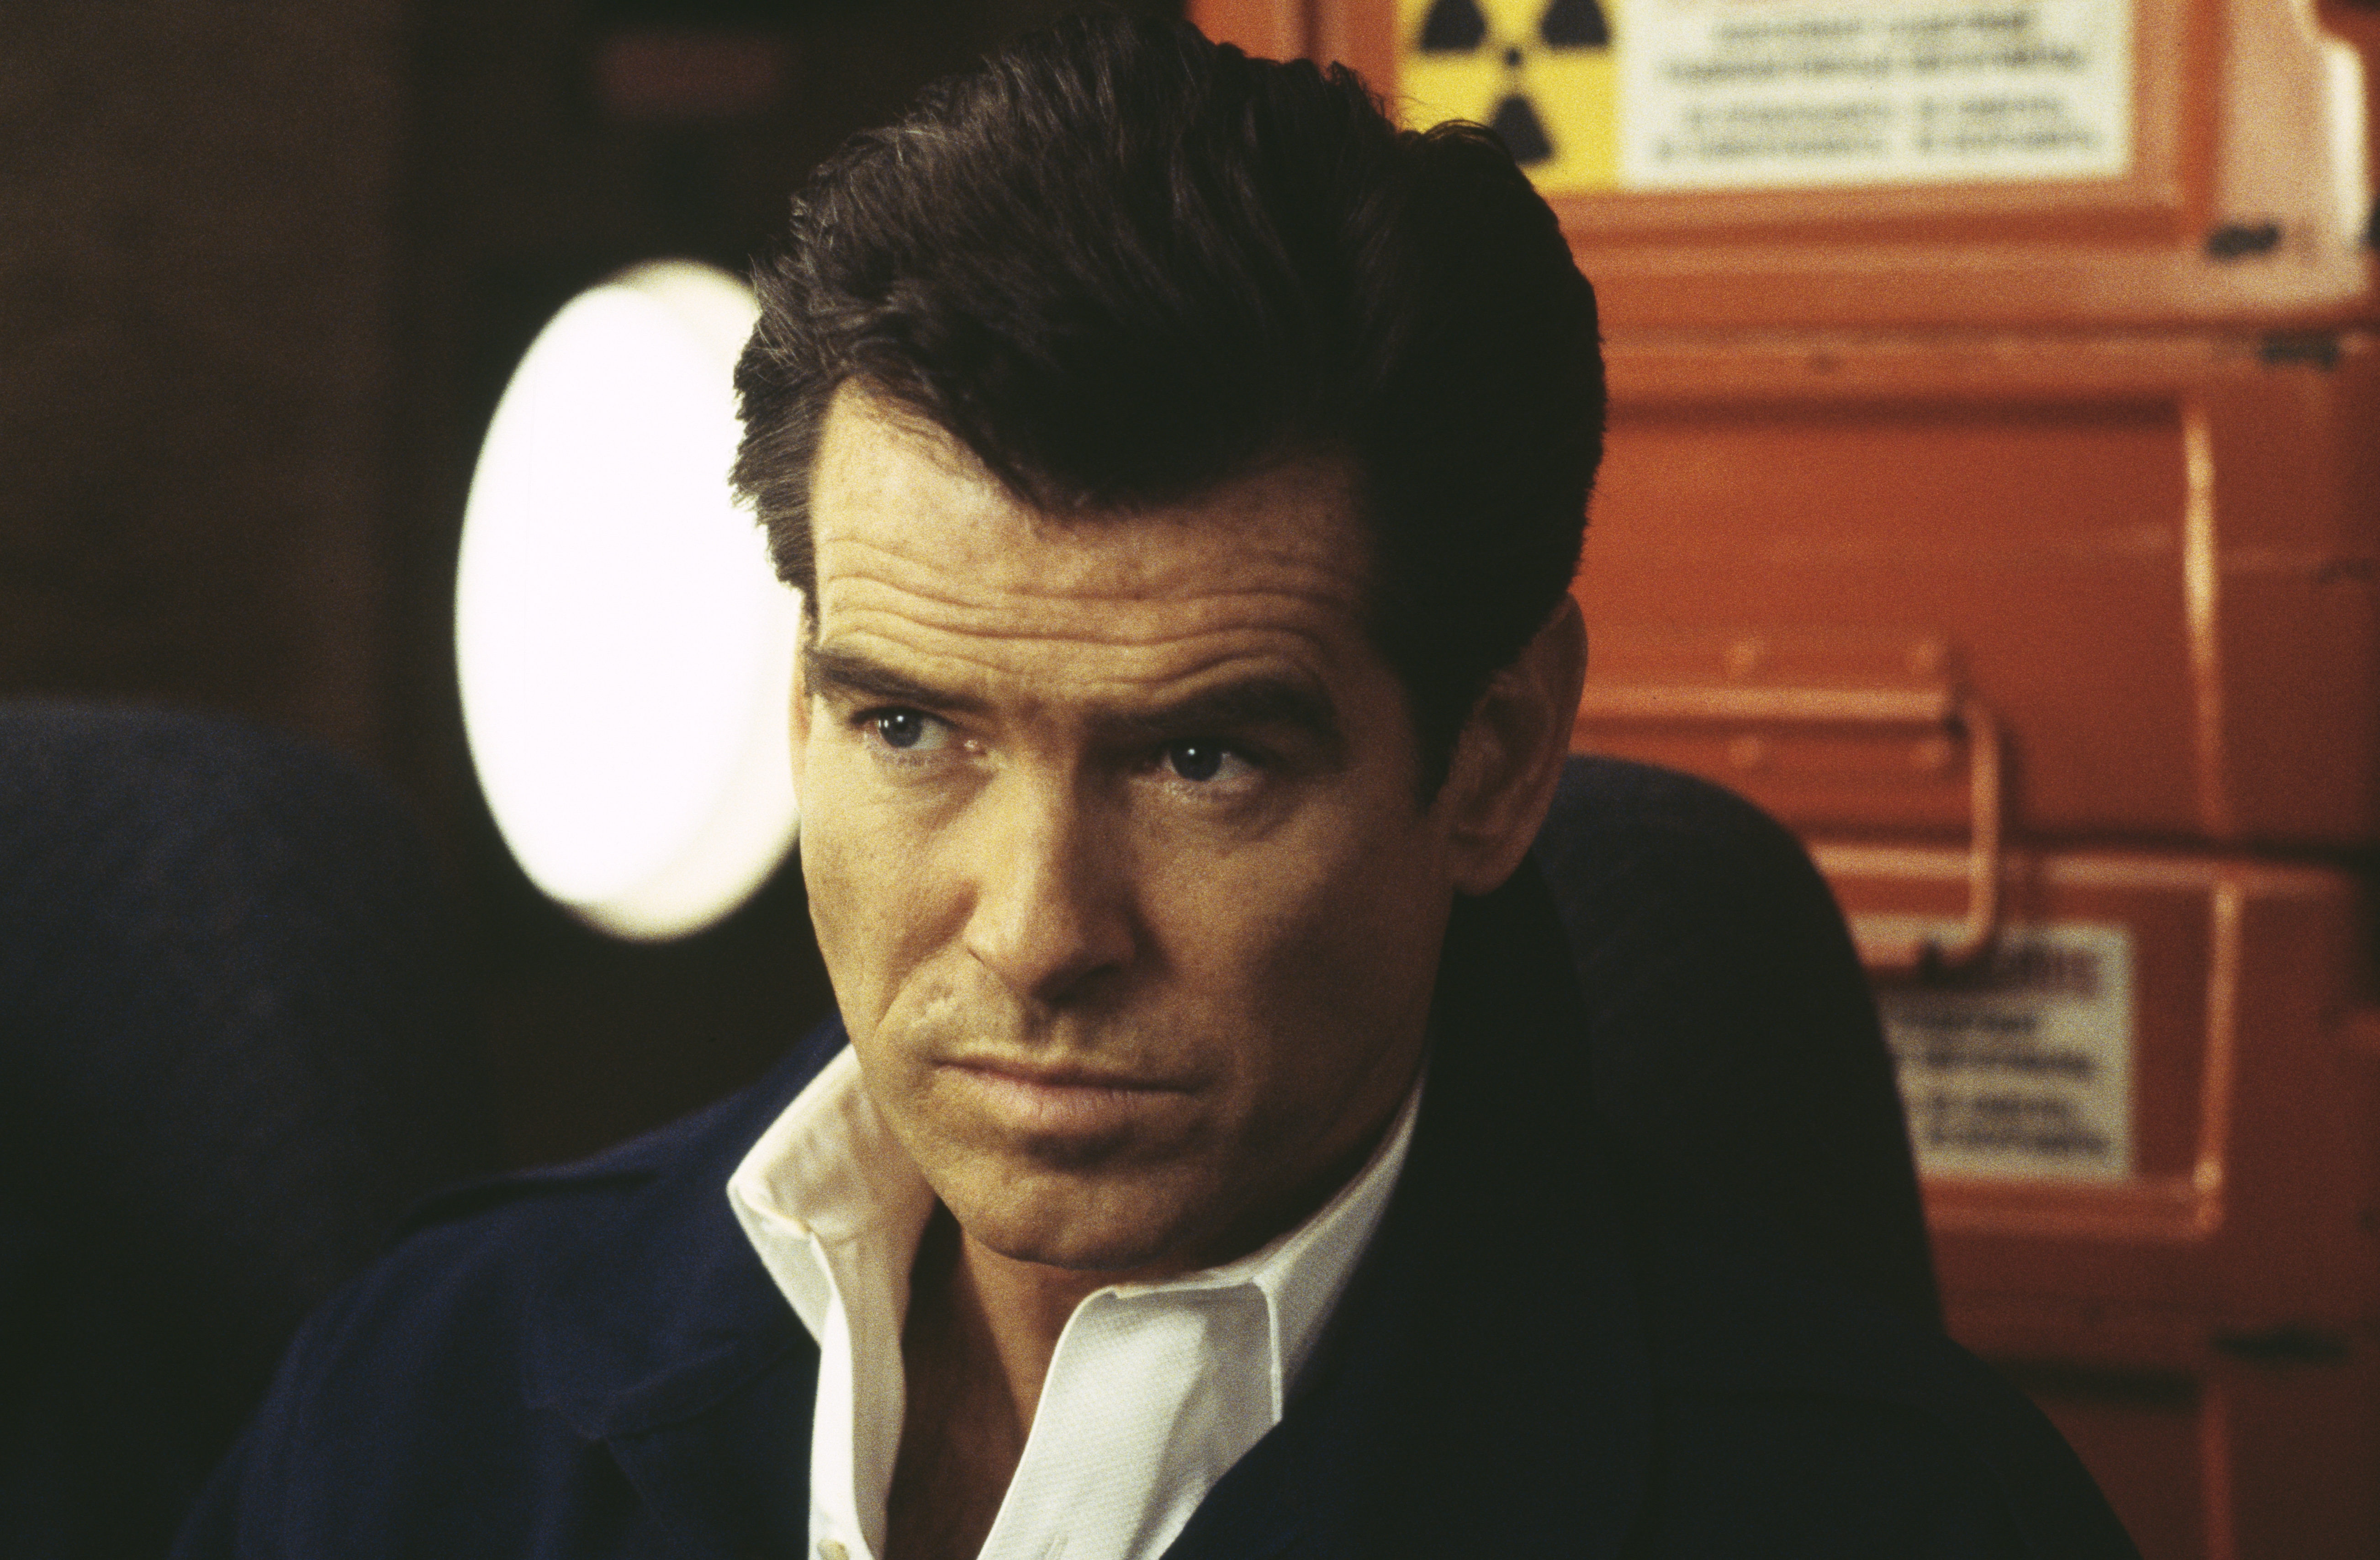 Pierce Brosnan in the set of "The World Is Not Enough," 1999 | Source: Getty Images